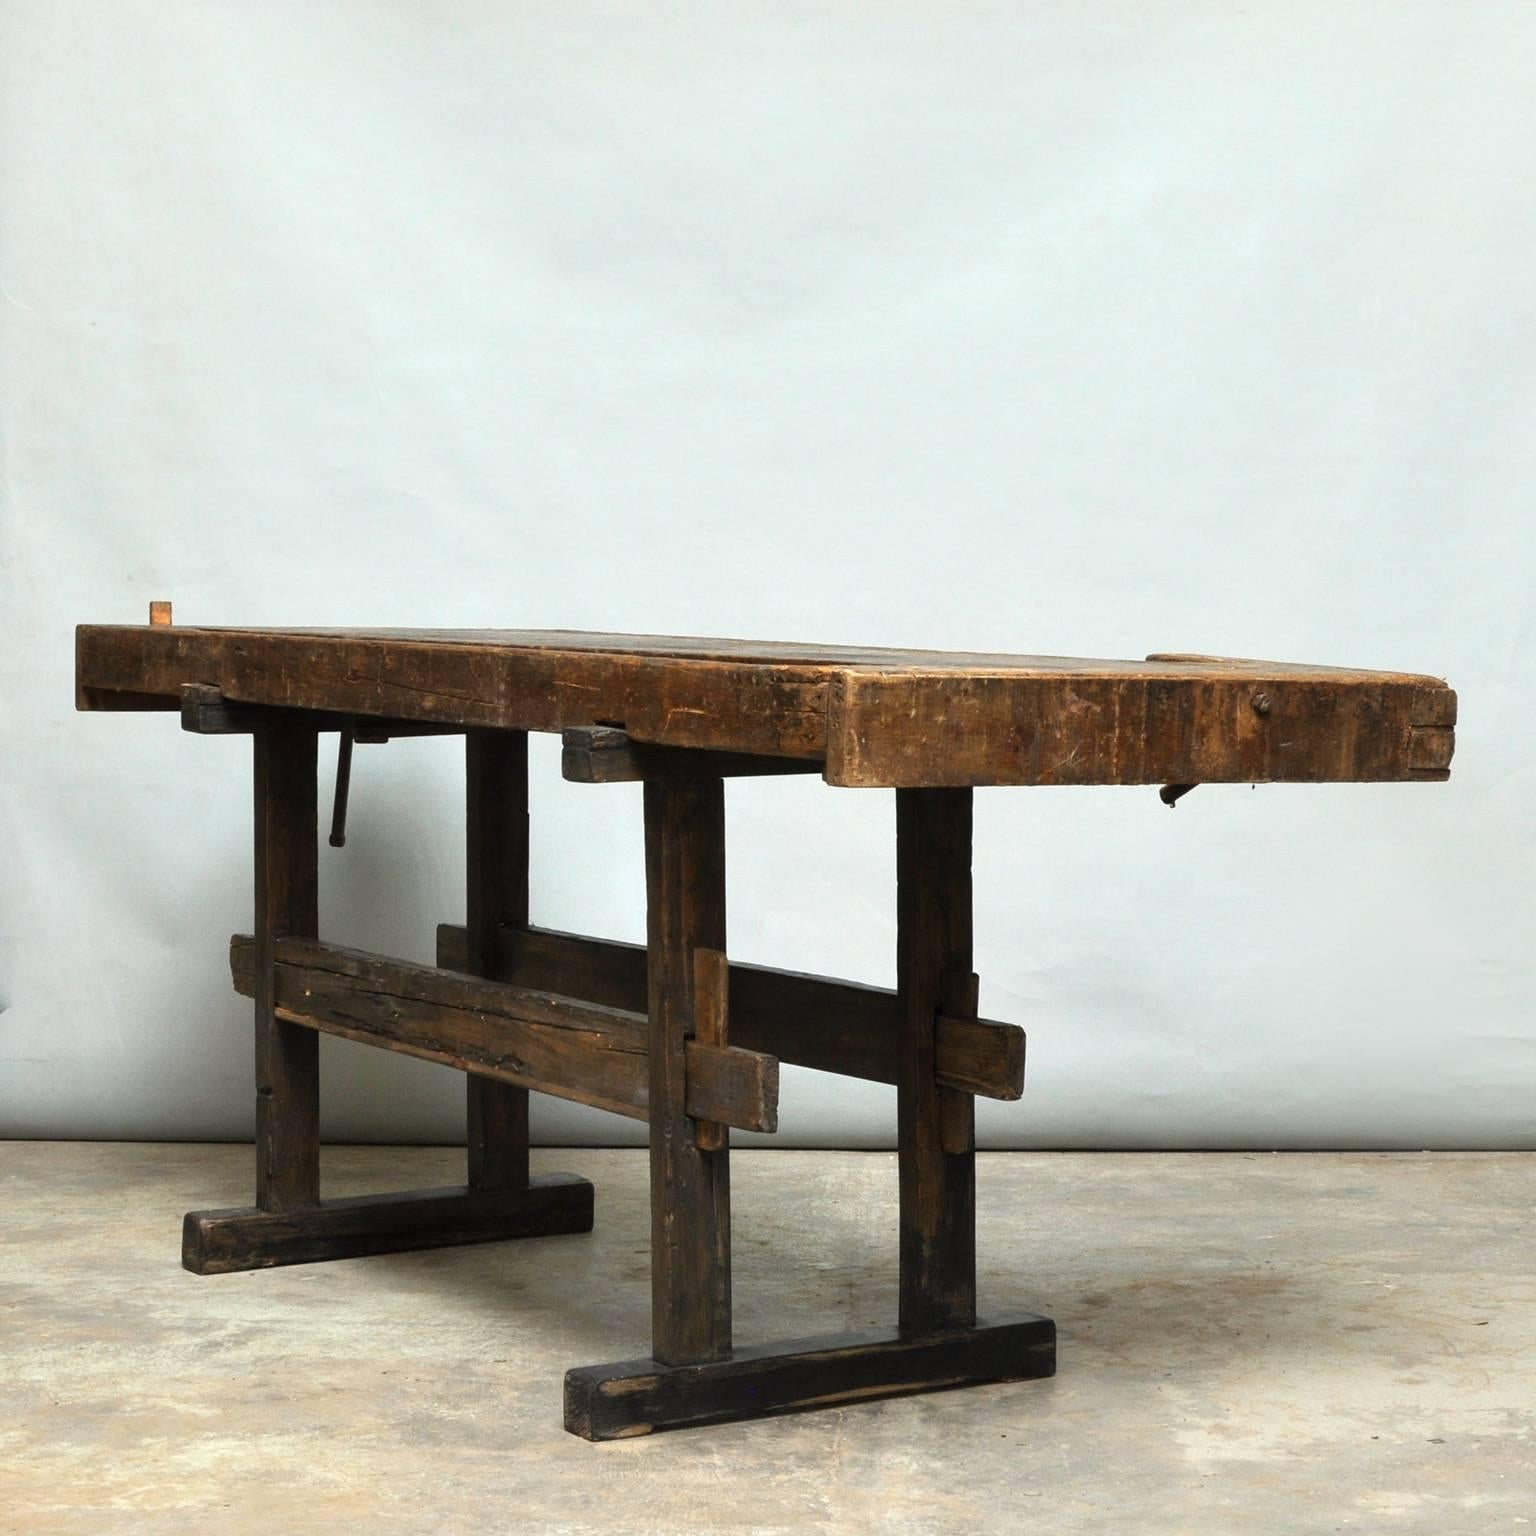 Antique oak workbench, circa 1900. Beautiful patina after years of intensive use. With two bench screws.
The workbench has been restored and waxed.